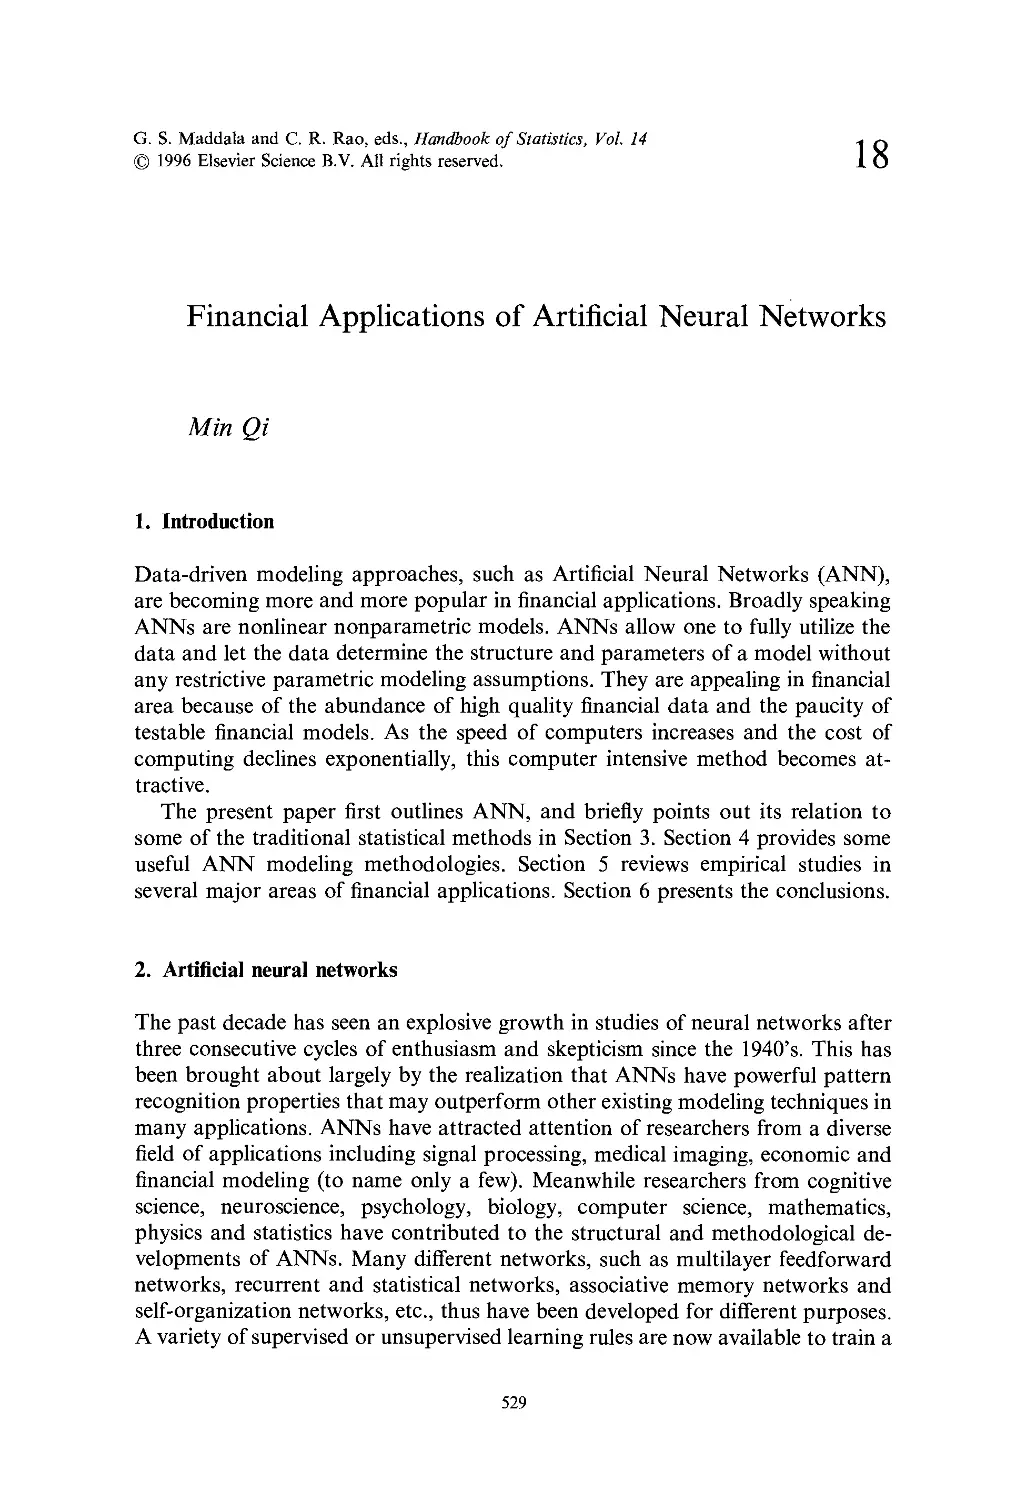 18. Financial Applications of Artificial Neural Networks